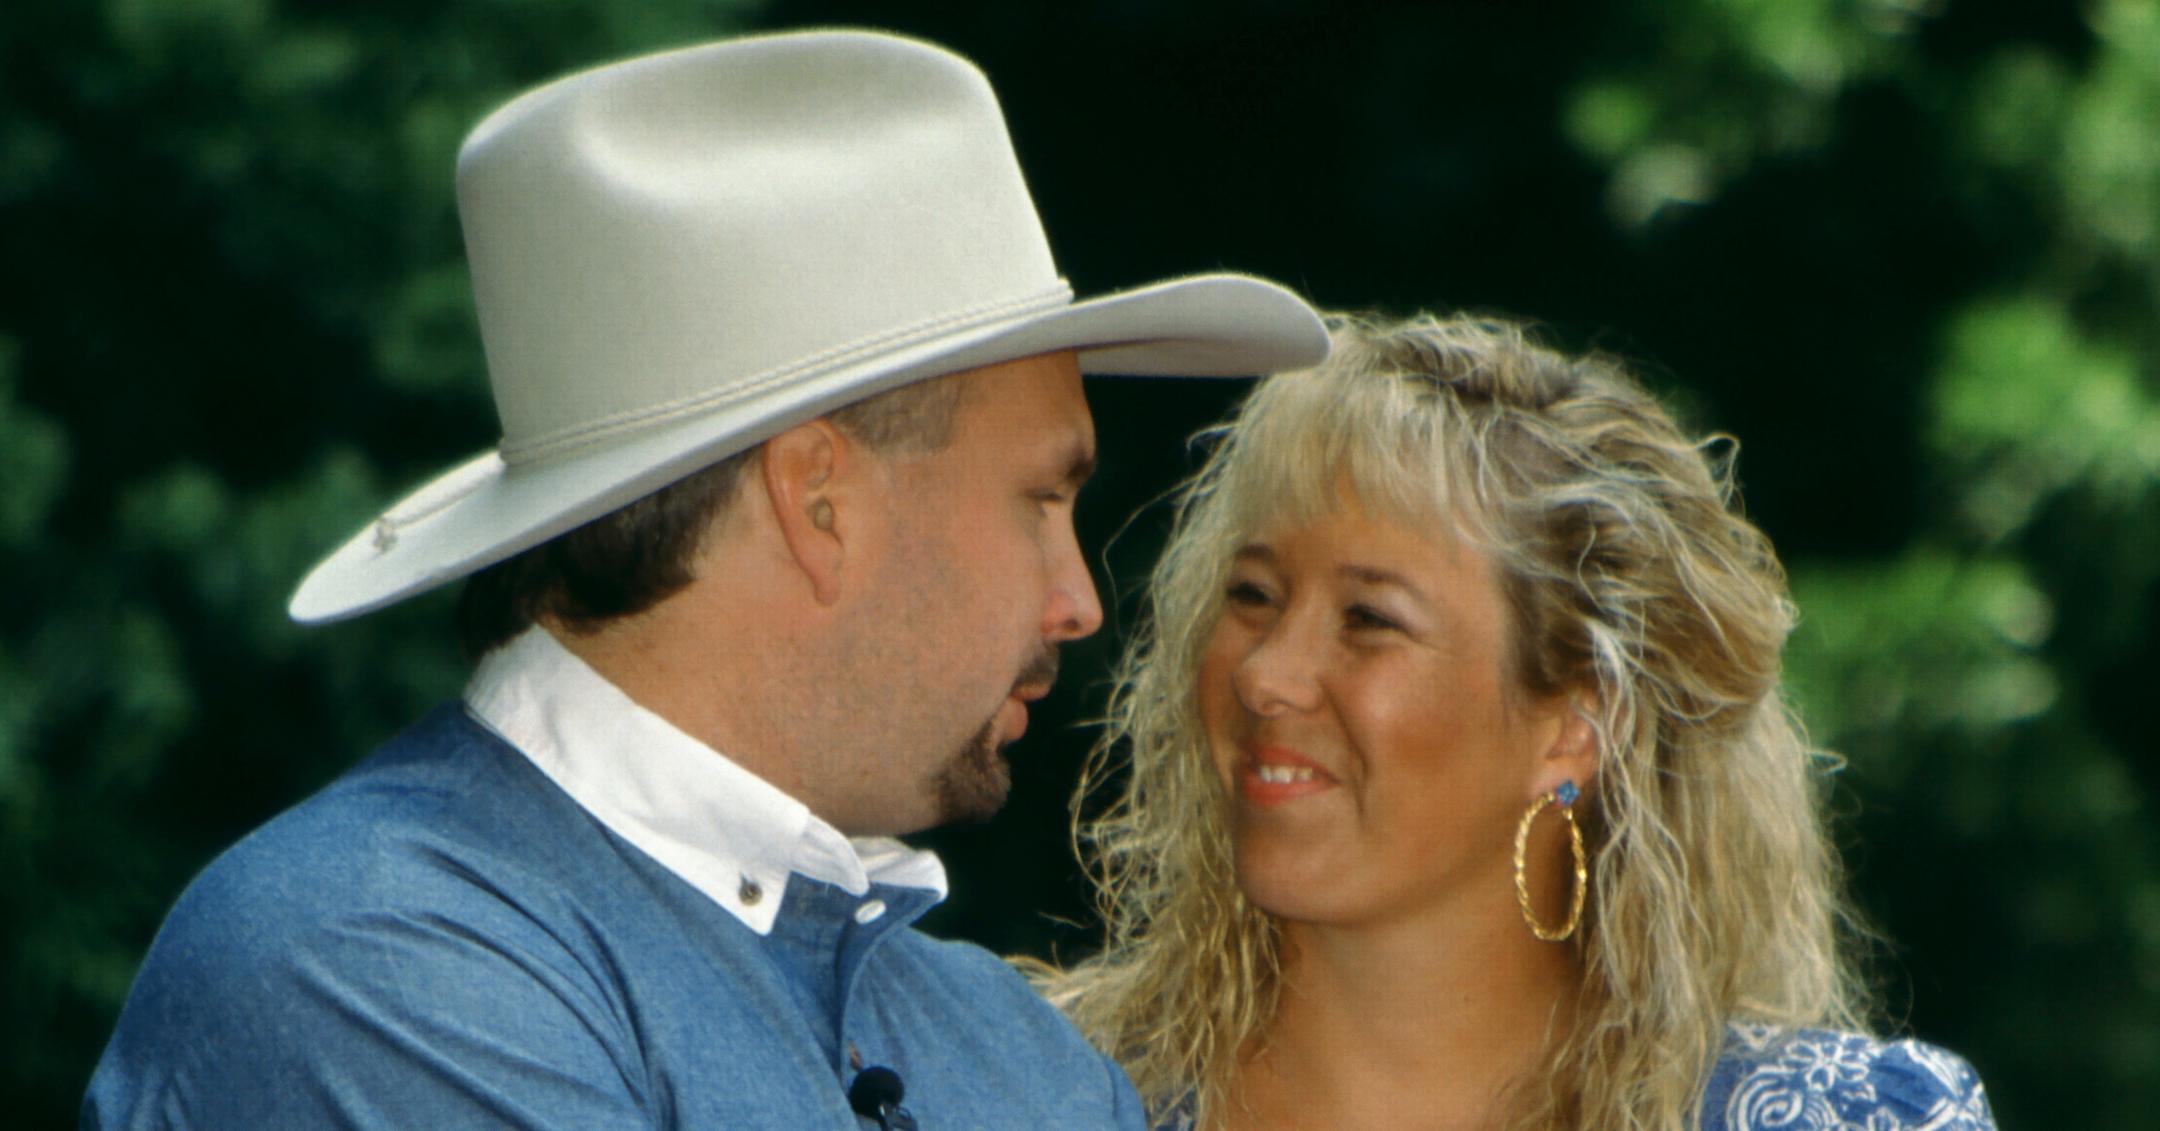 Garth Brooks Ex-Wife on Their Marriage, Divorce, and Raising Their Kids